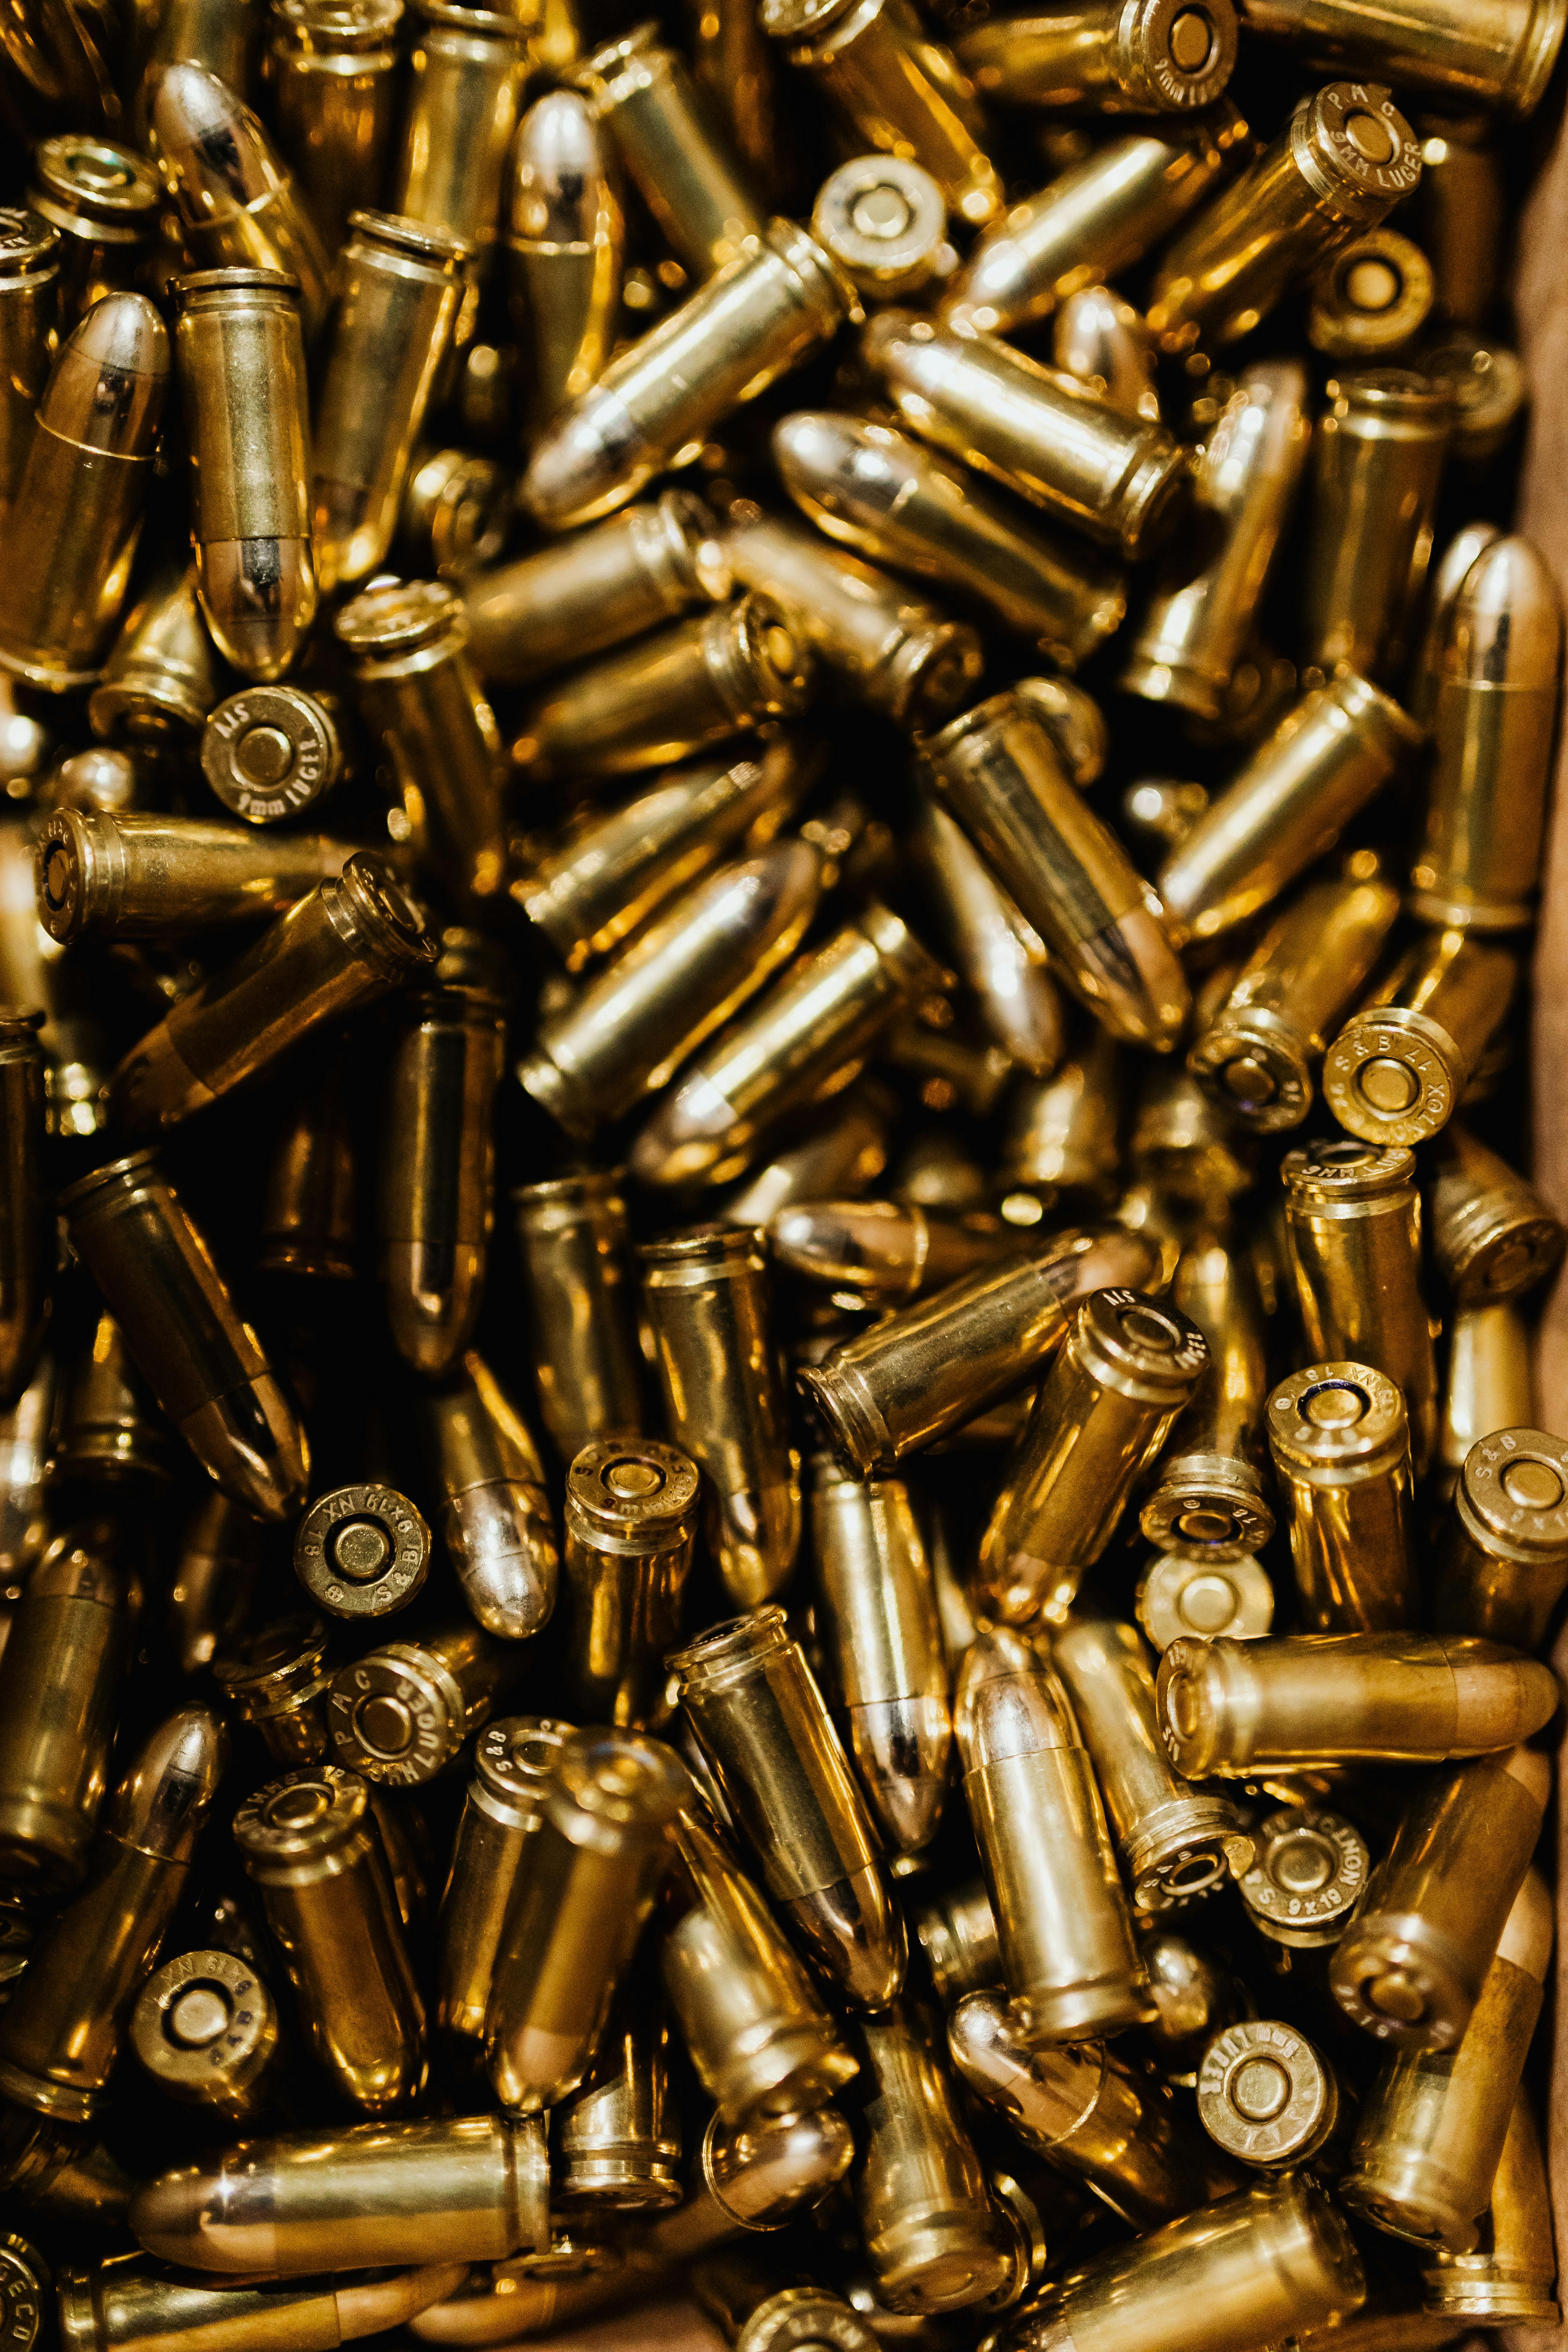 I grabbed this picture while shooting today if anyone wants a nice HD ammo  wallpaper  rar15